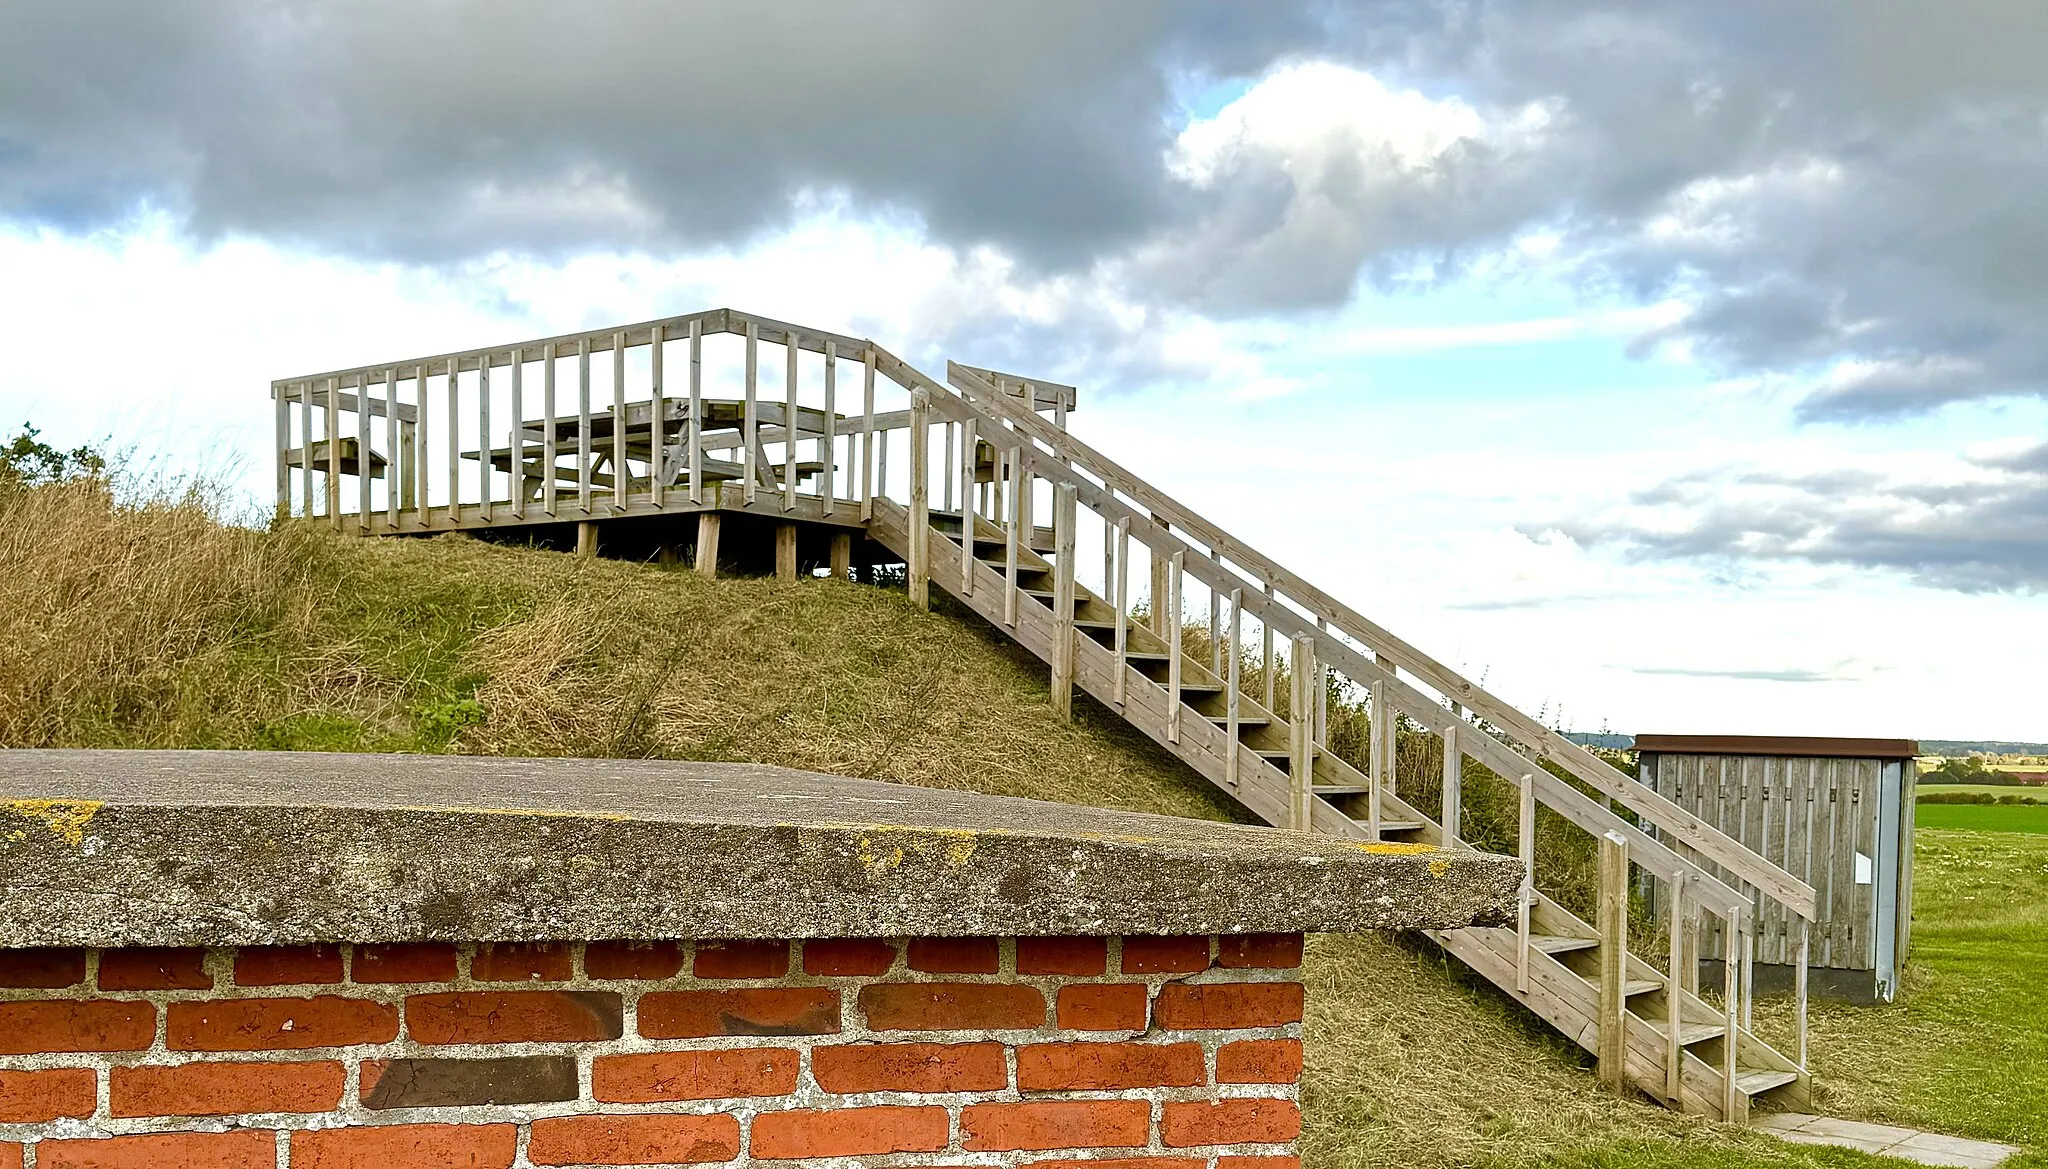 Photo showing: The viewing hill in the village of Gerlev, Denmark.